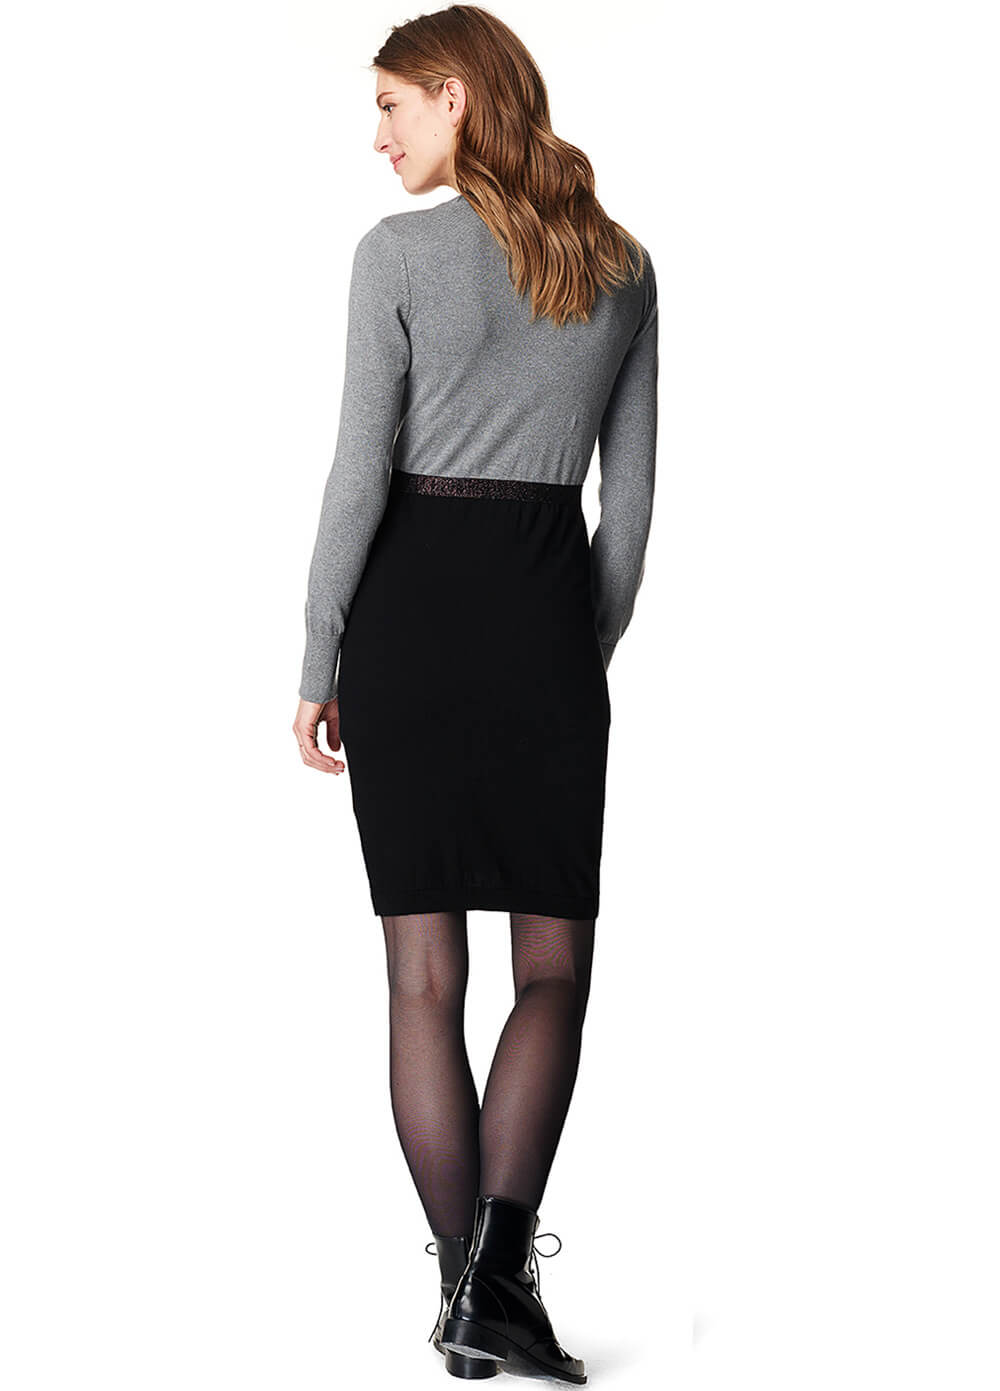 Knitted Black/Grey Colour Block Maternity Dress in by Esprit